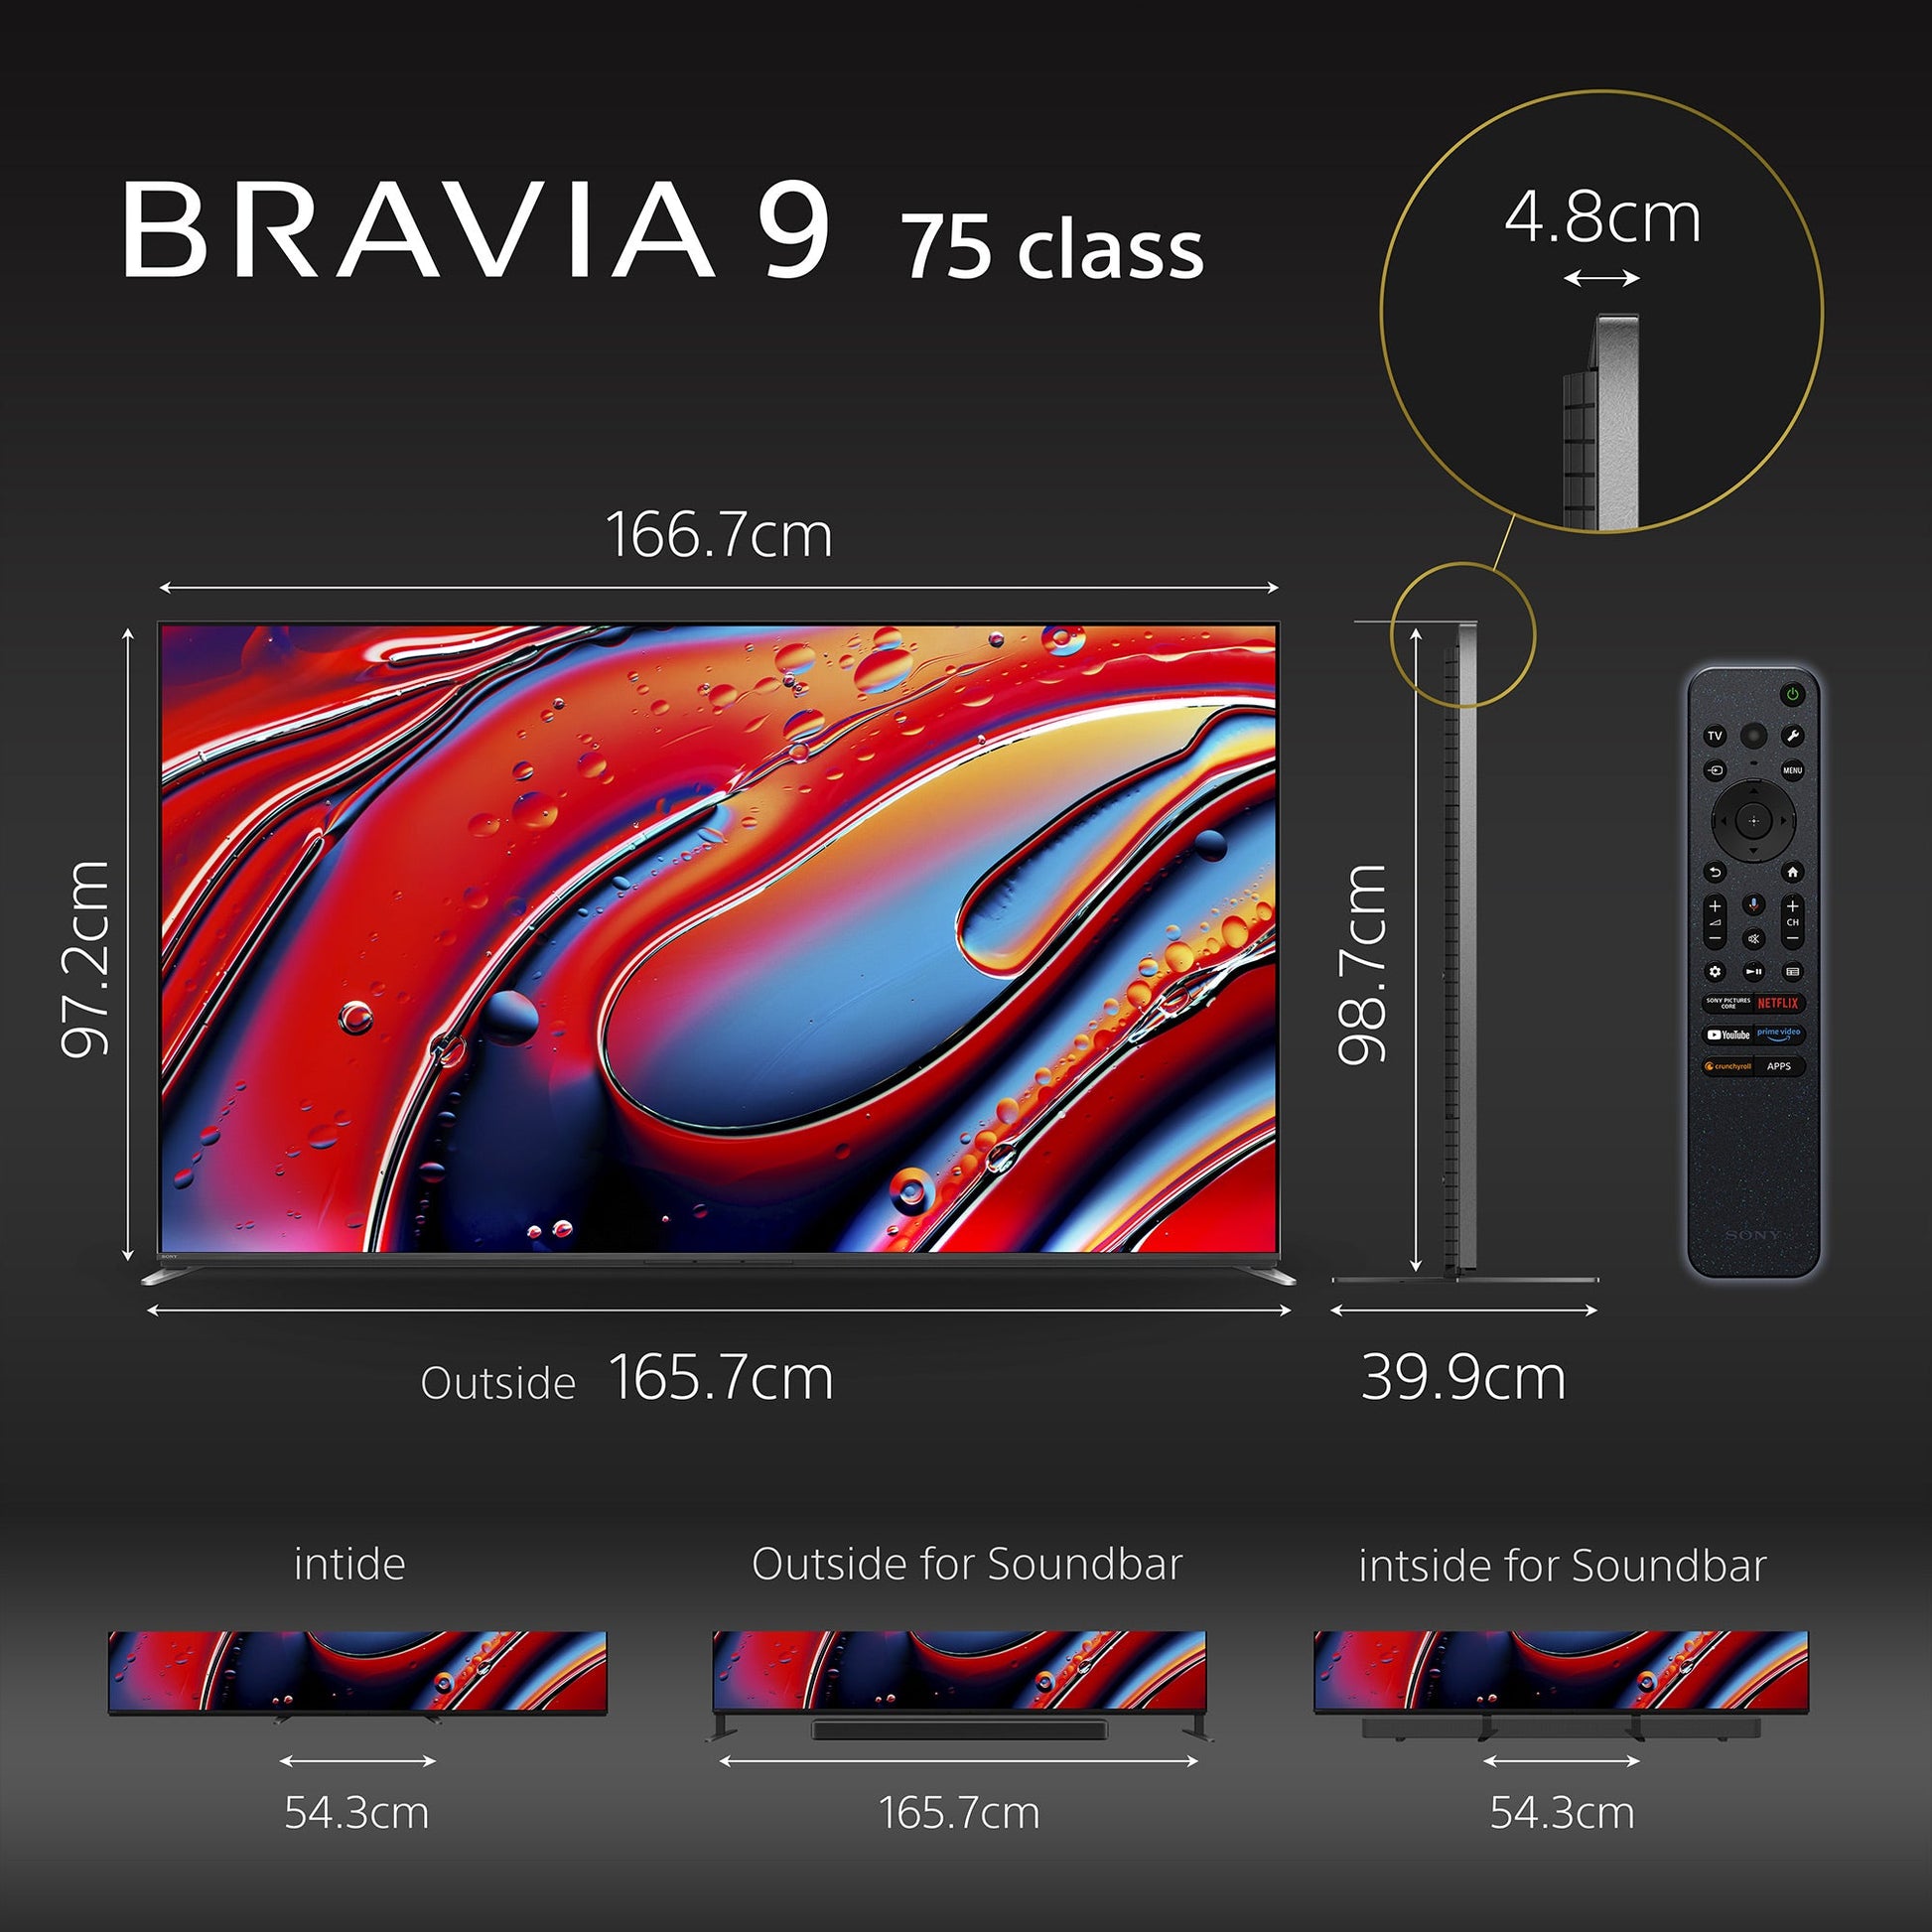 Sony | BRAVIA 9| 75 Inch |XR BACKLIGHT MASTER DRIVE TV with High Peak Luminance | Our brightest TV ever for ultimate cinema, sports & PS5 gaming |4K HDR Smart TV (Google TV) | 2024 Model